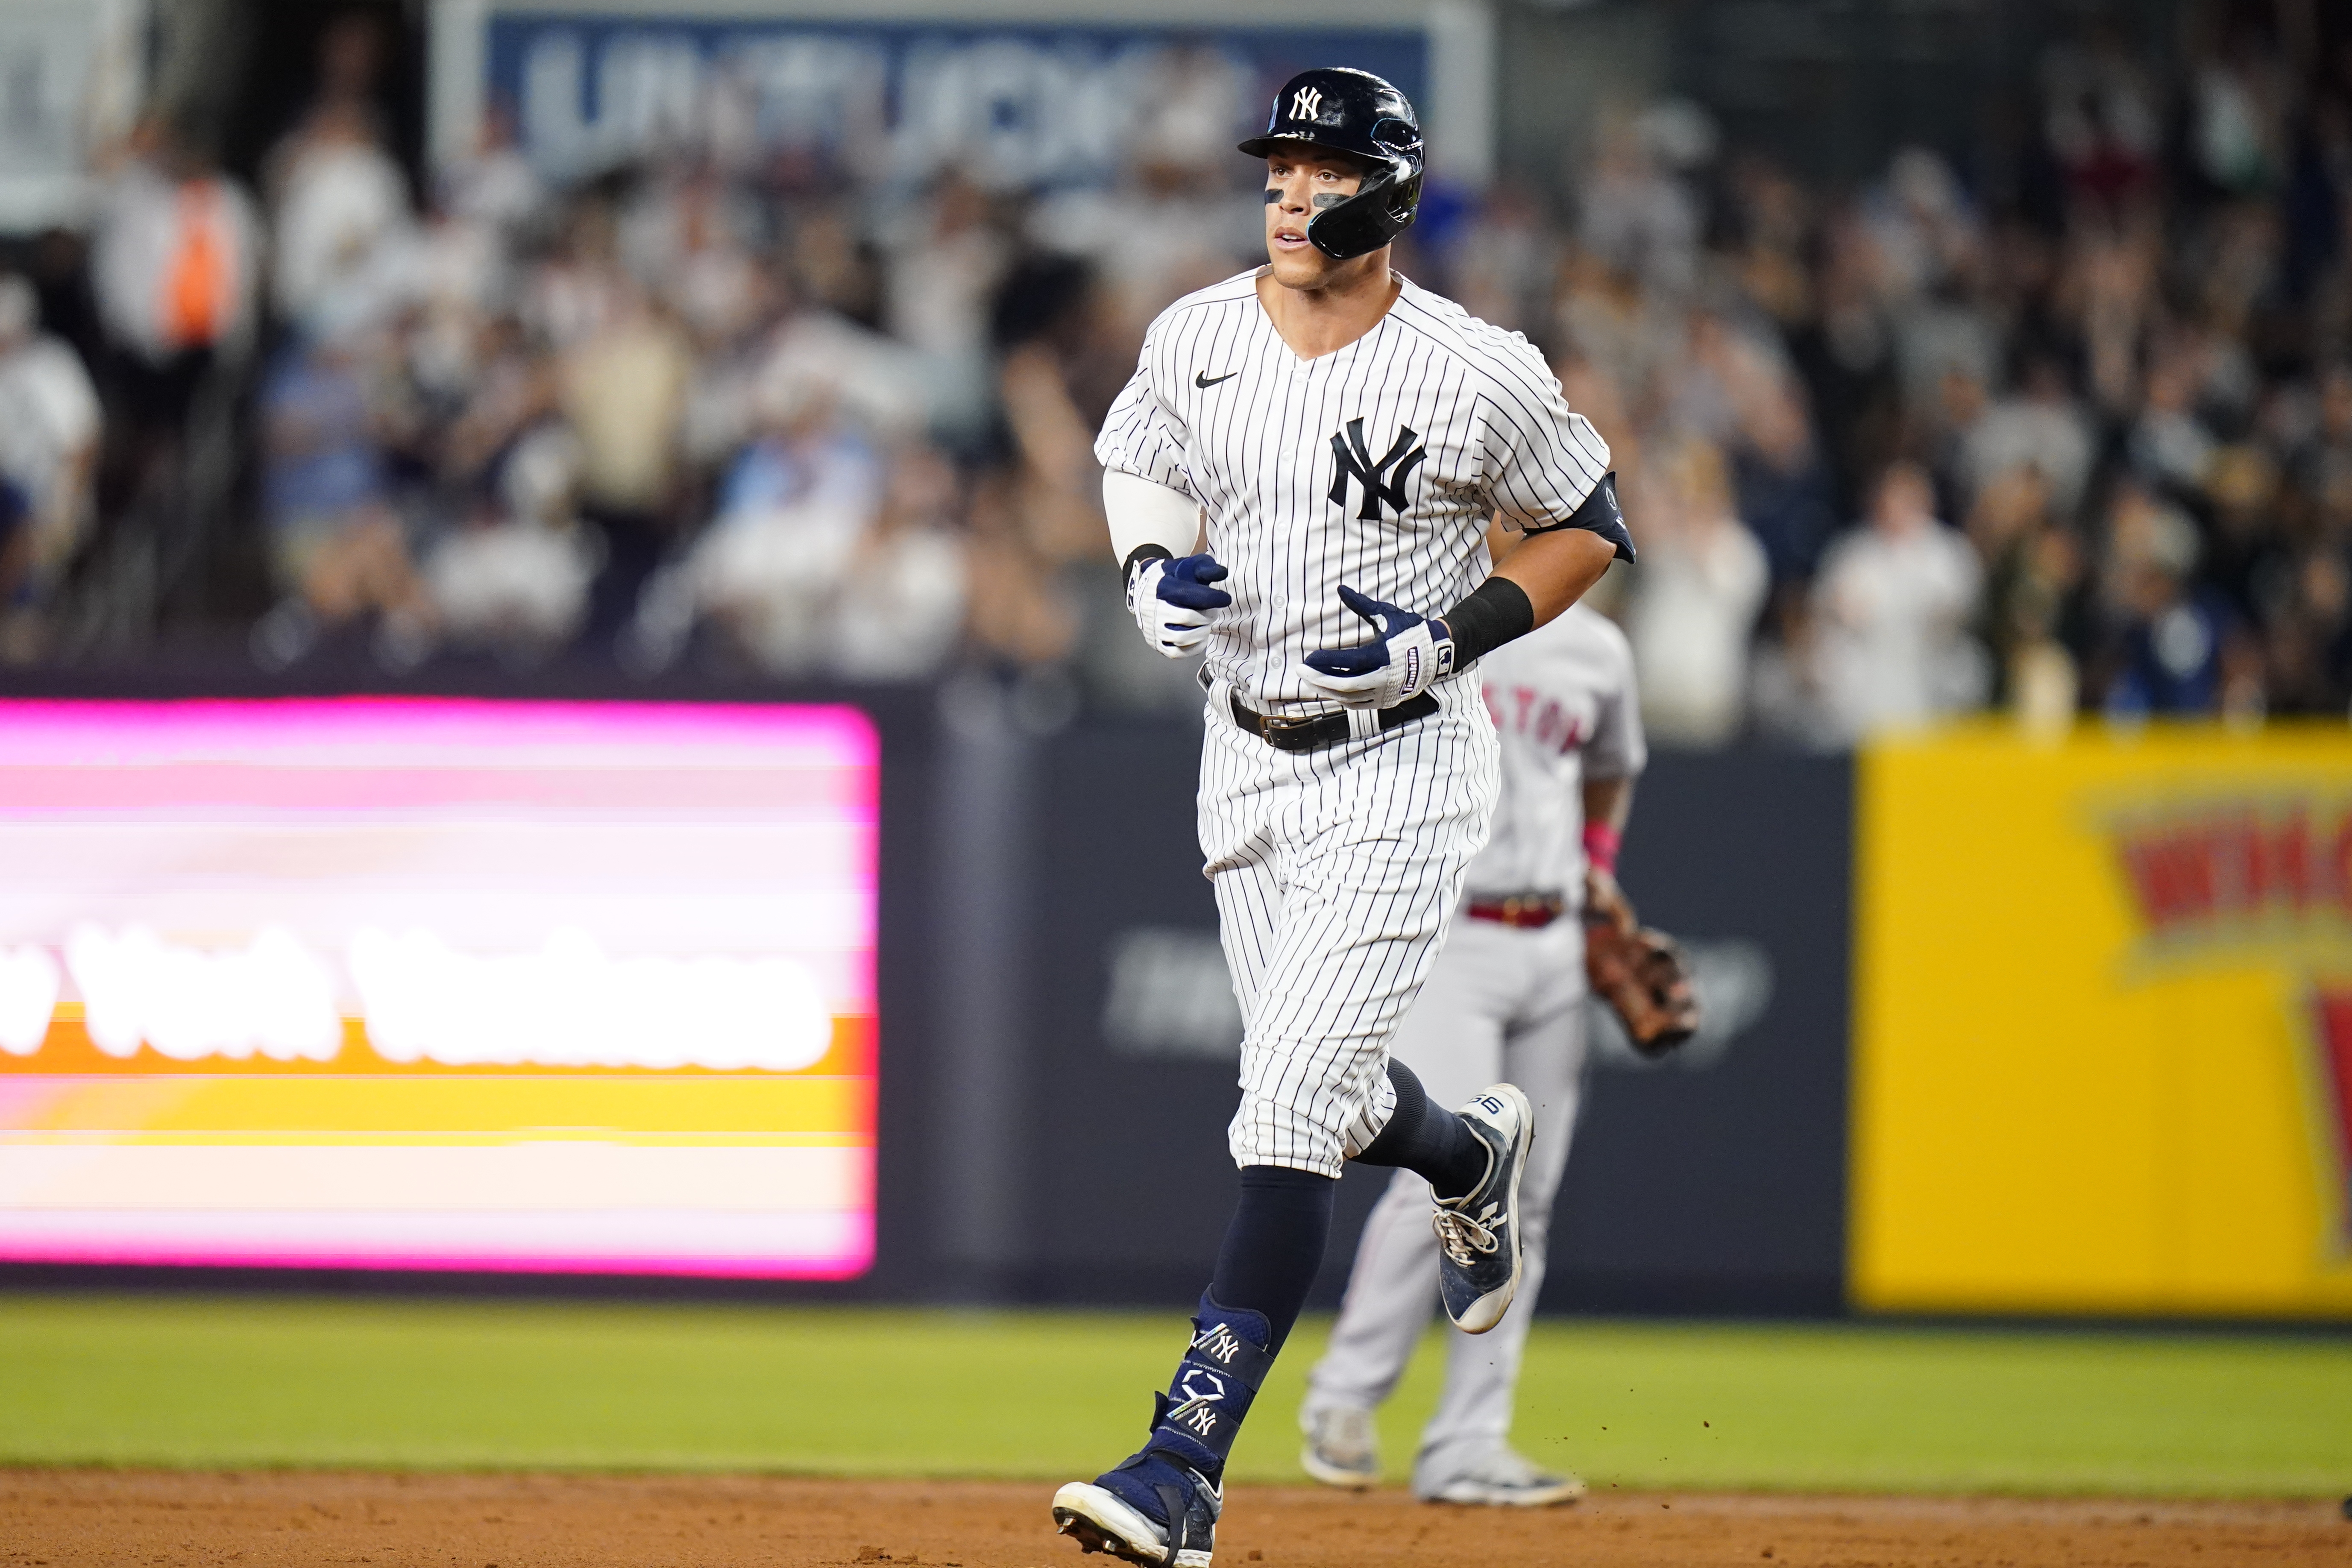 Yankees win in critical rubber game